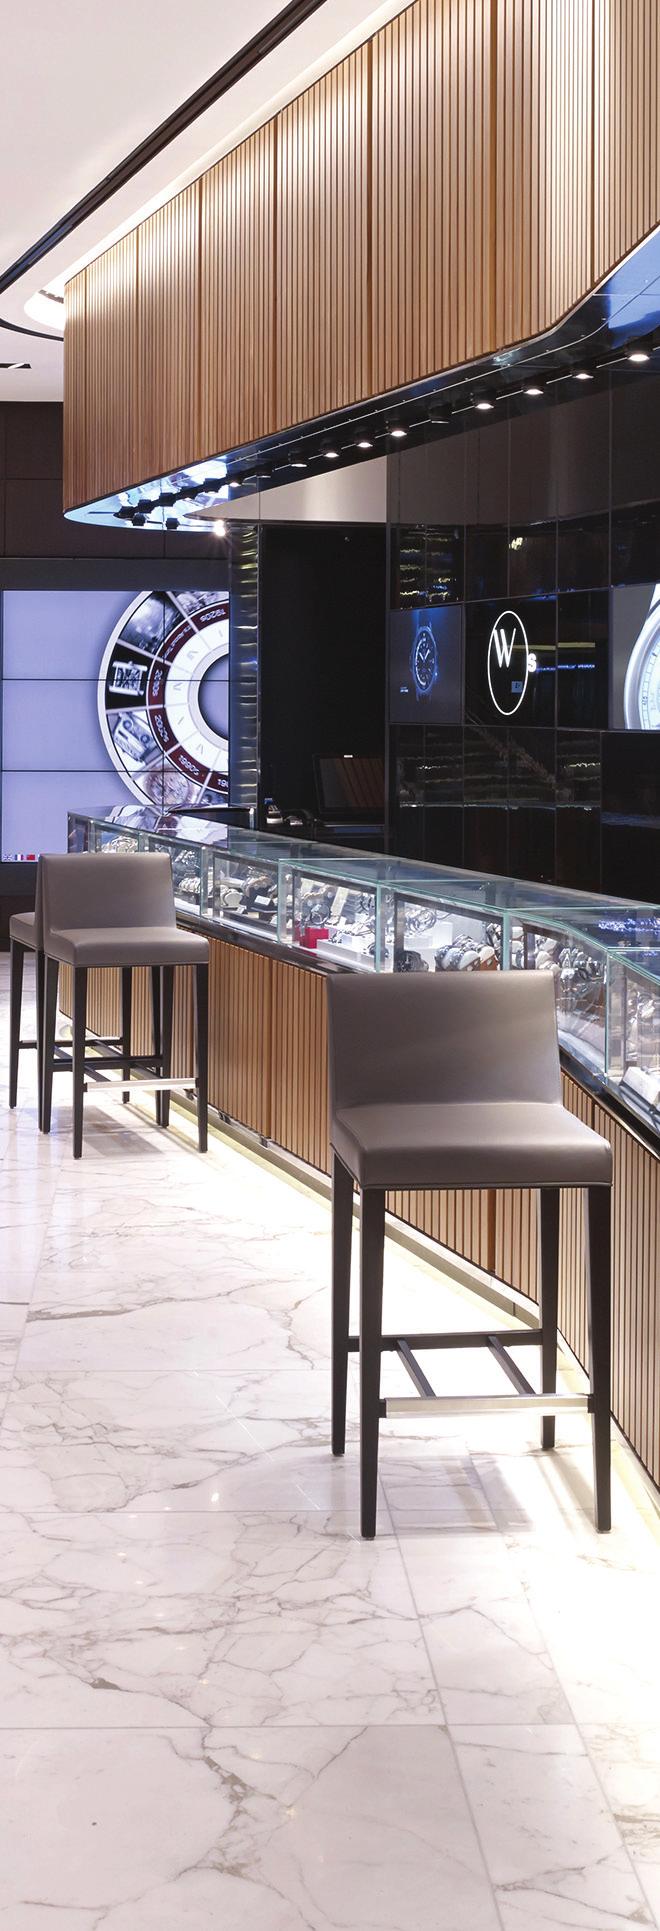 Introducing the New Retail Global Group Aurum have spent the last three years establishing the Watches of Switzerland store at 155 Regent Street, as the highly prestigious, international